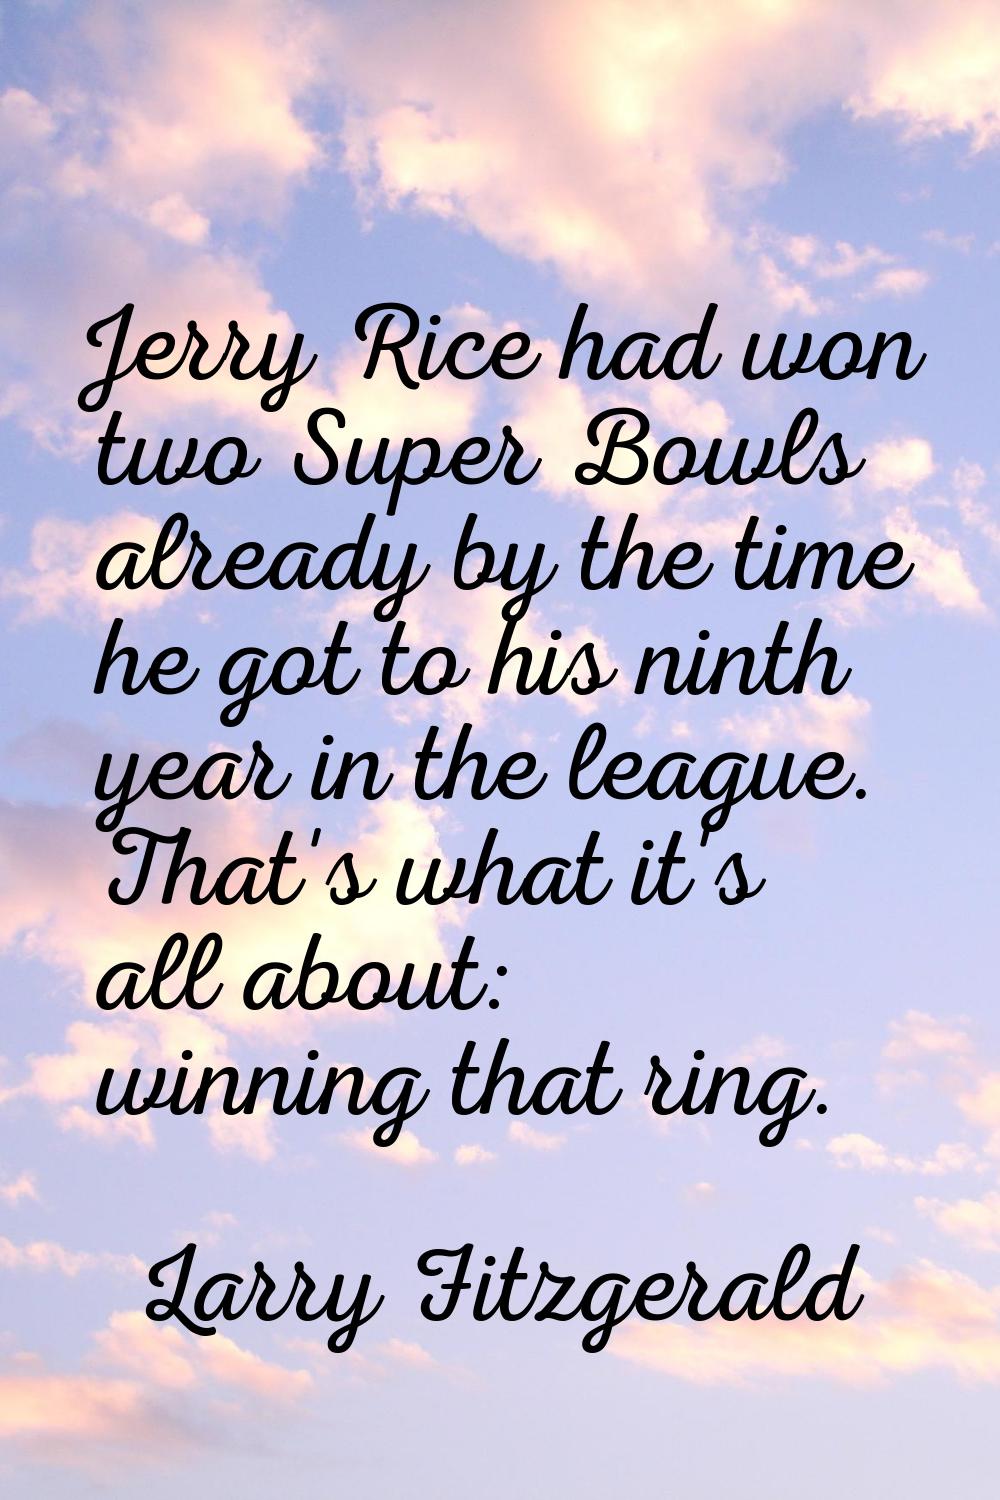 Jerry Rice had won two Super Bowls already by the time he got to his ninth year in the league. That